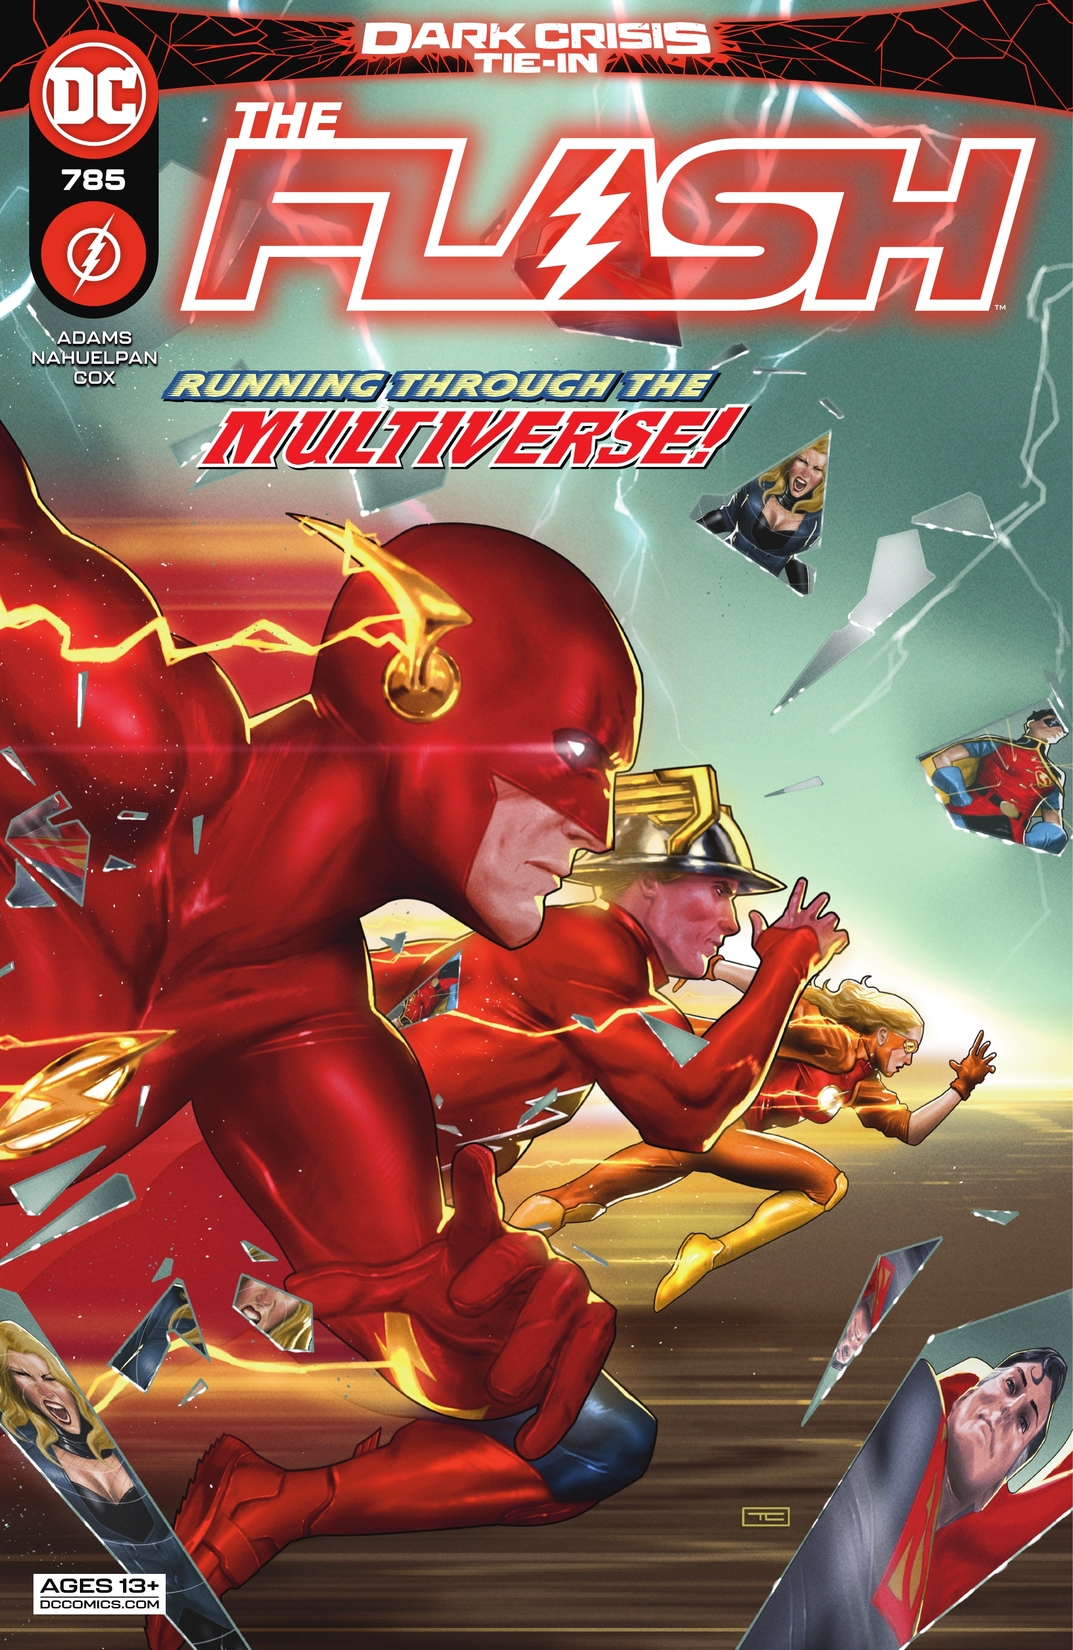 The Flash (2016-) #785 preview images